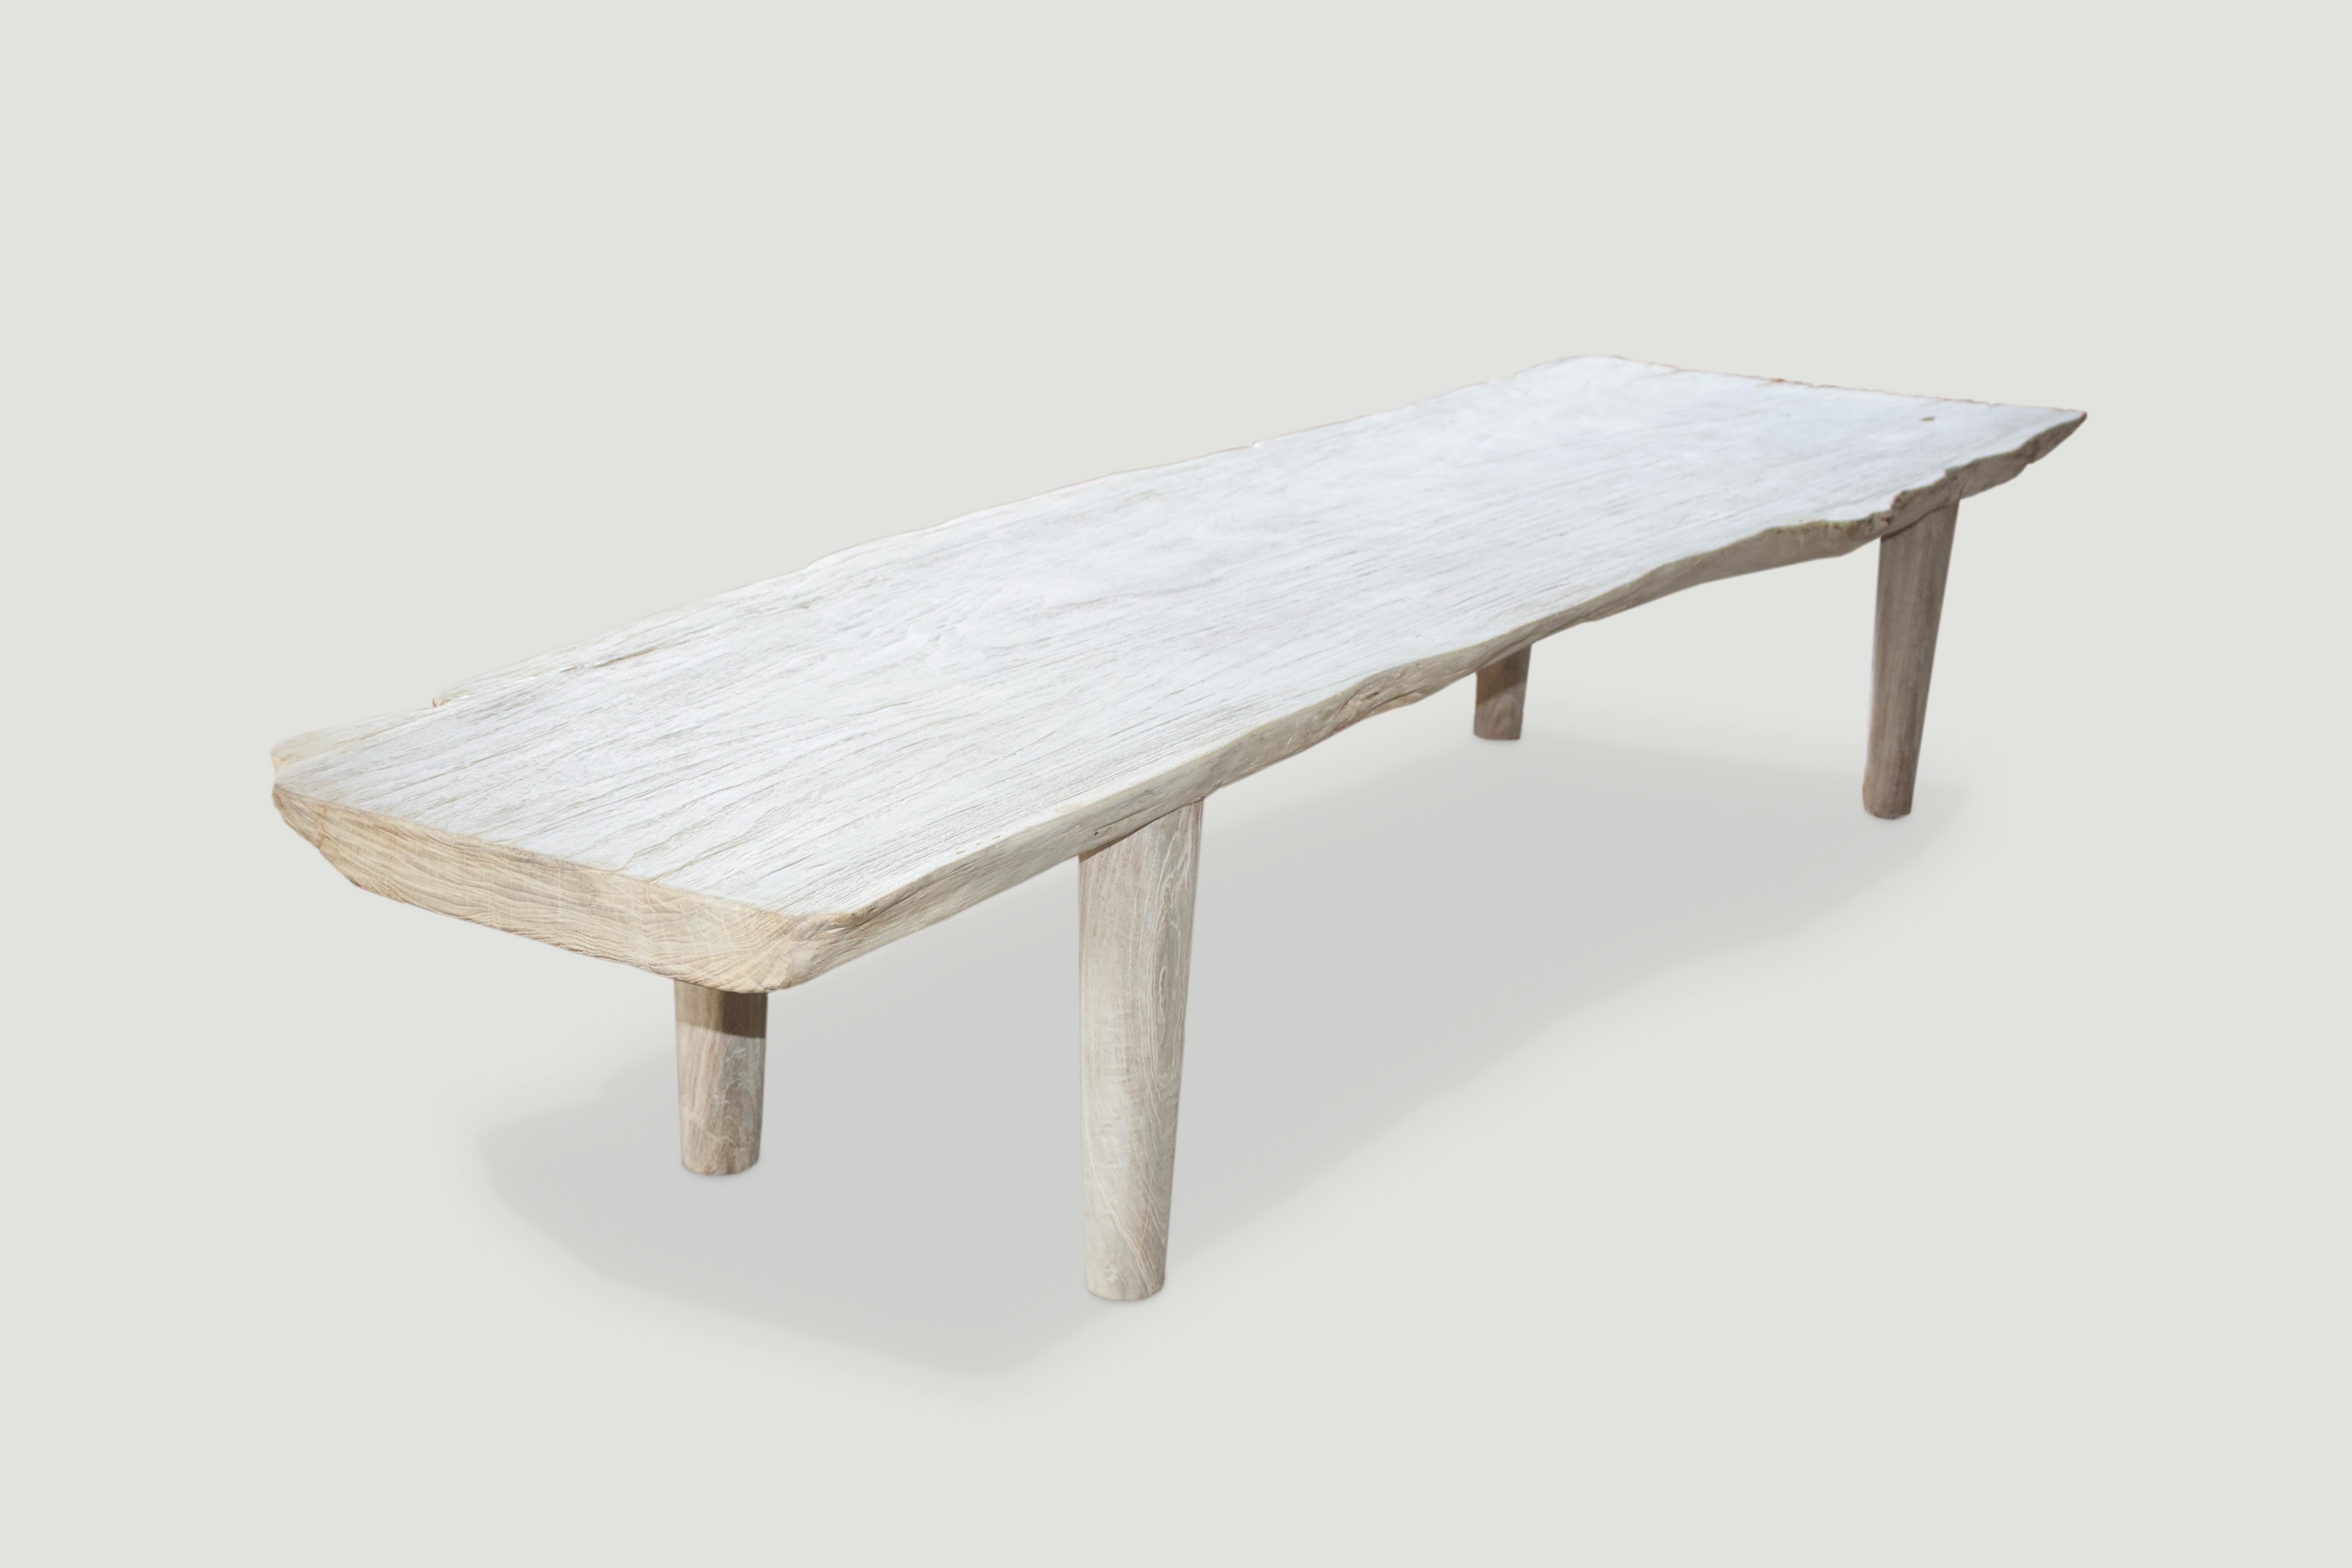 Impressive single slab, live edge teak coffee table or bench with natural erosion on one end. We have added a light white wash finish, allowing the beautiful grain of this reclaimed teak slab to be exposed plus added Minimalist legs. Perfect for